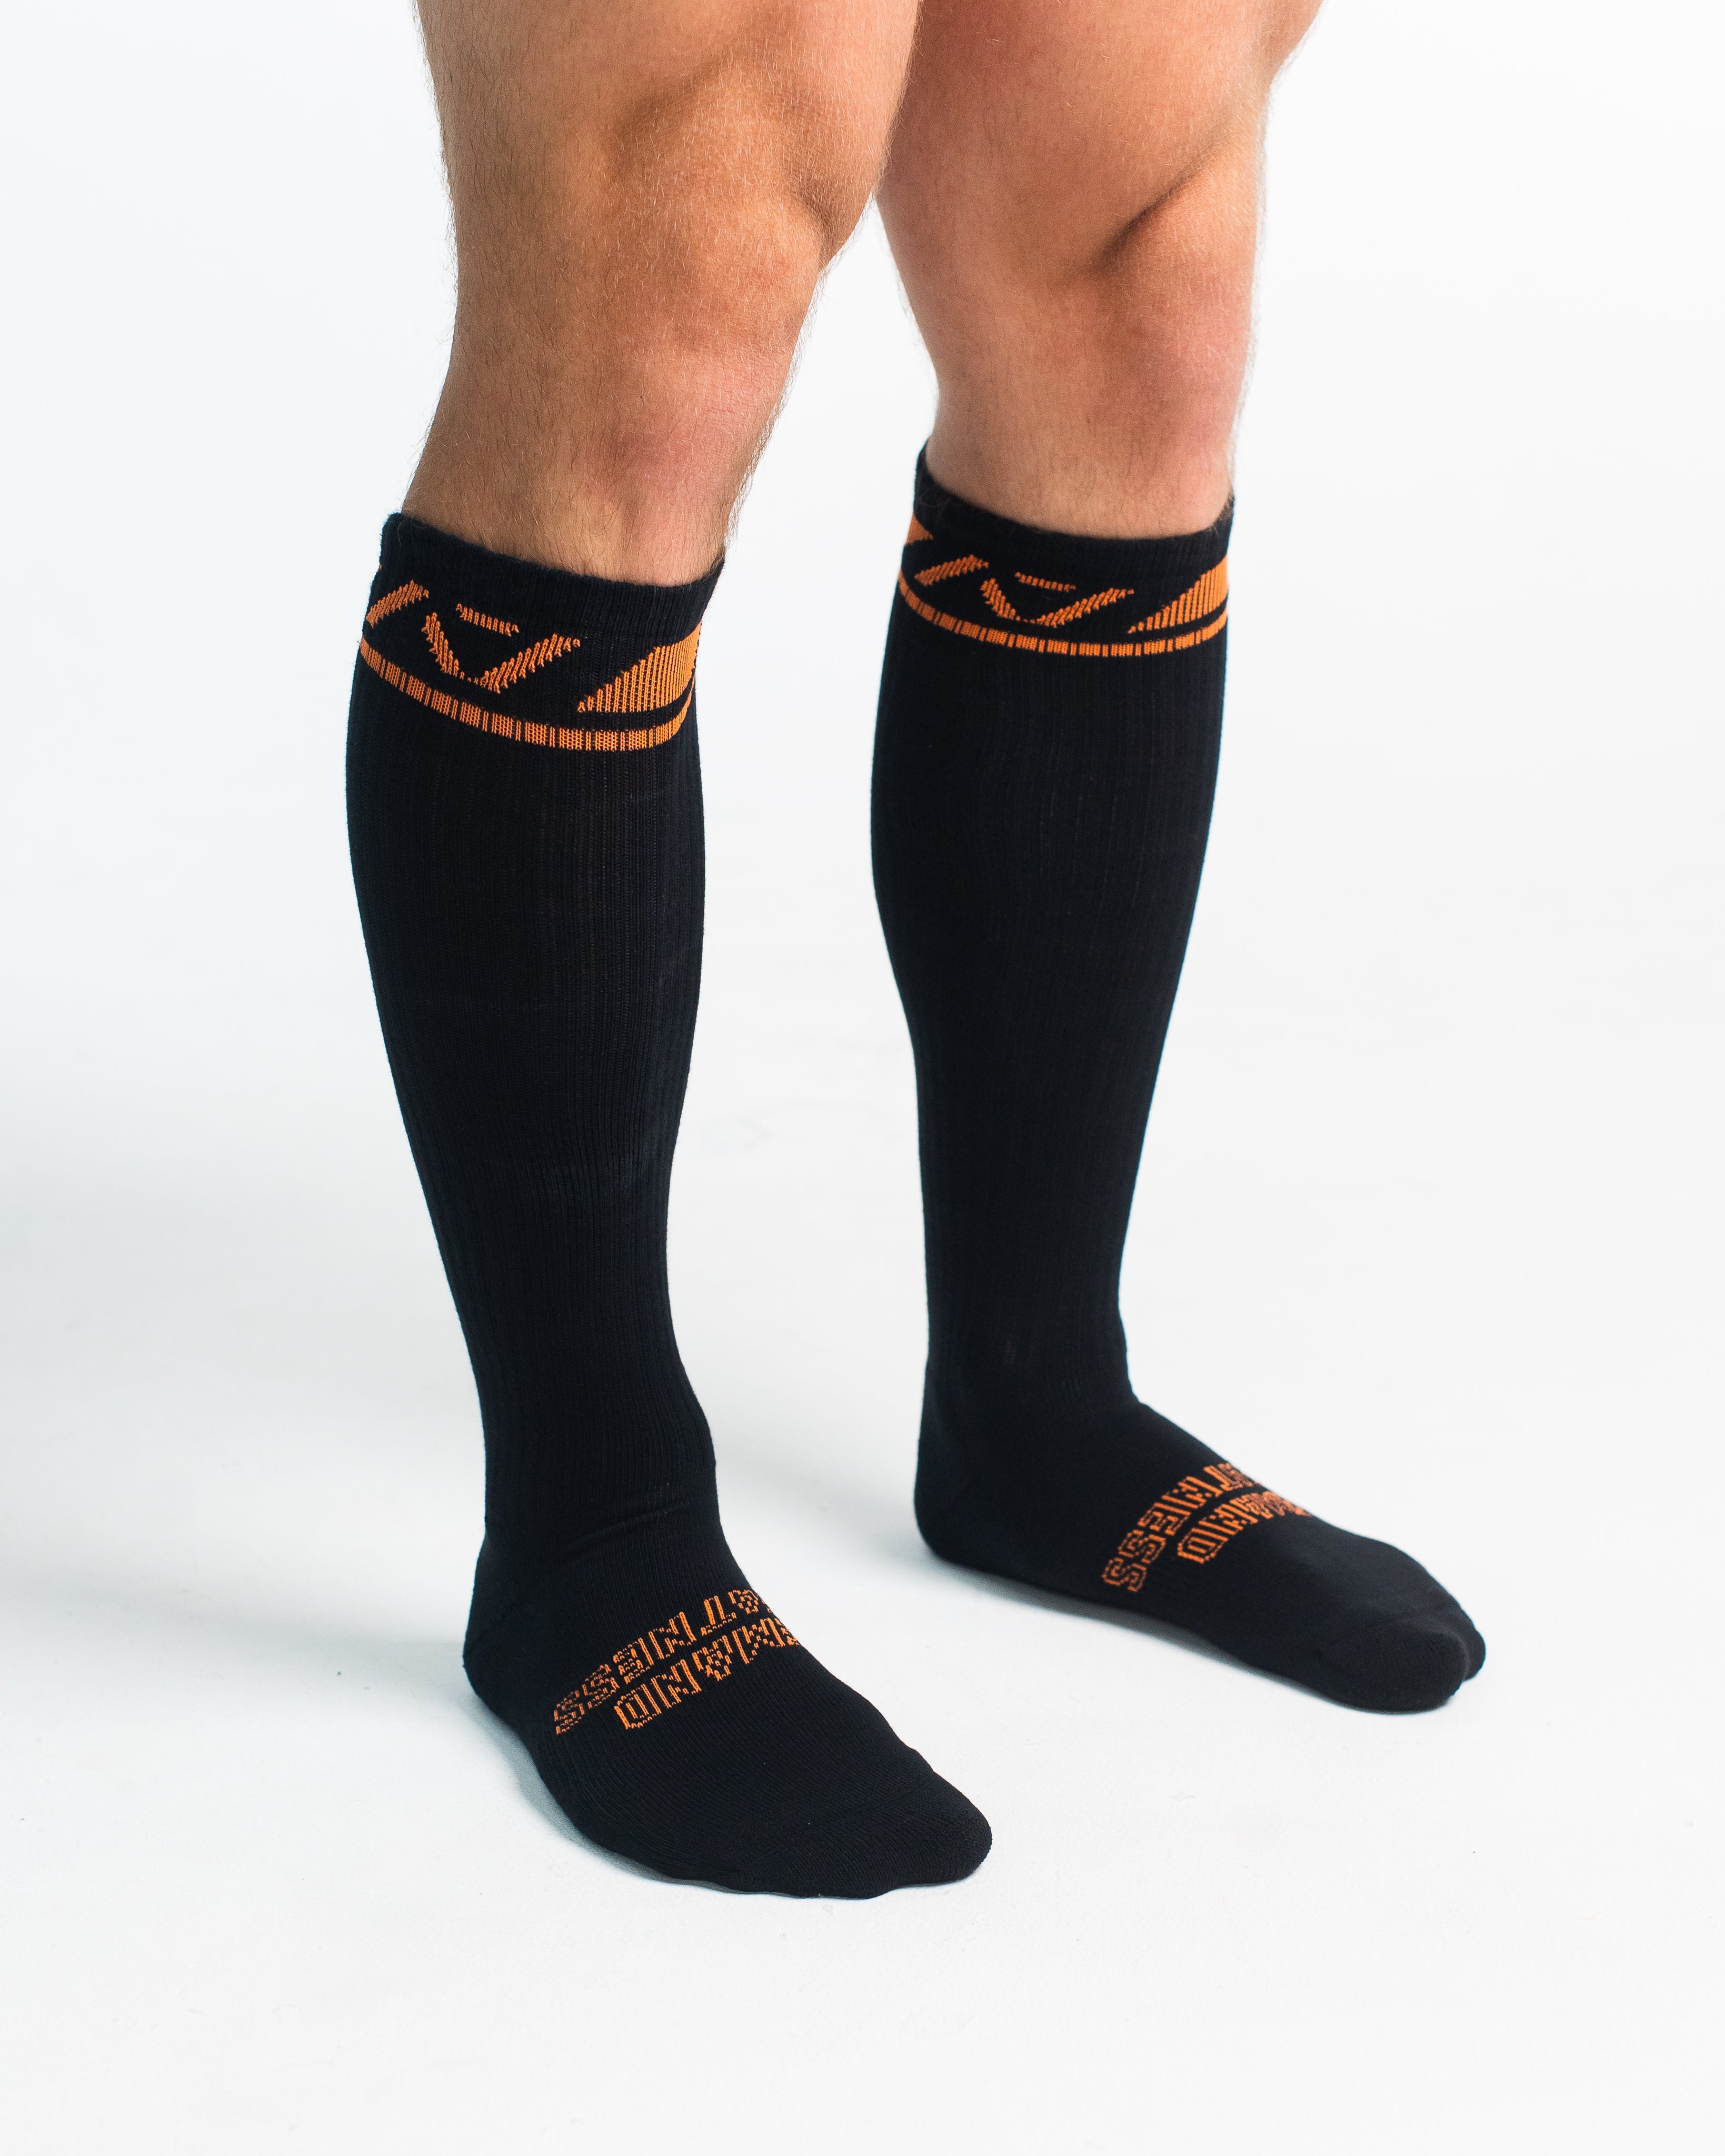 A7 Blaze deadlift socks are designed specifically for pulls and keep your shins protected from scrapes. A7 deadlift socks are a perfect pair to wear in training or powerlifting competition. The A7 IPF Approved Kit includes Powerlifting Singlet, A7 Meet Shirt, A7 Zebra Wrist Wraps, A7 Deadlift Socks, Hourglass Knee Sleeves (Stiff Knee Sleeves and Rigor Mortis Knee Sleeves). All A7 Powerlifting Equipment shipping to UK, Norway, Switzerland and Iceland.